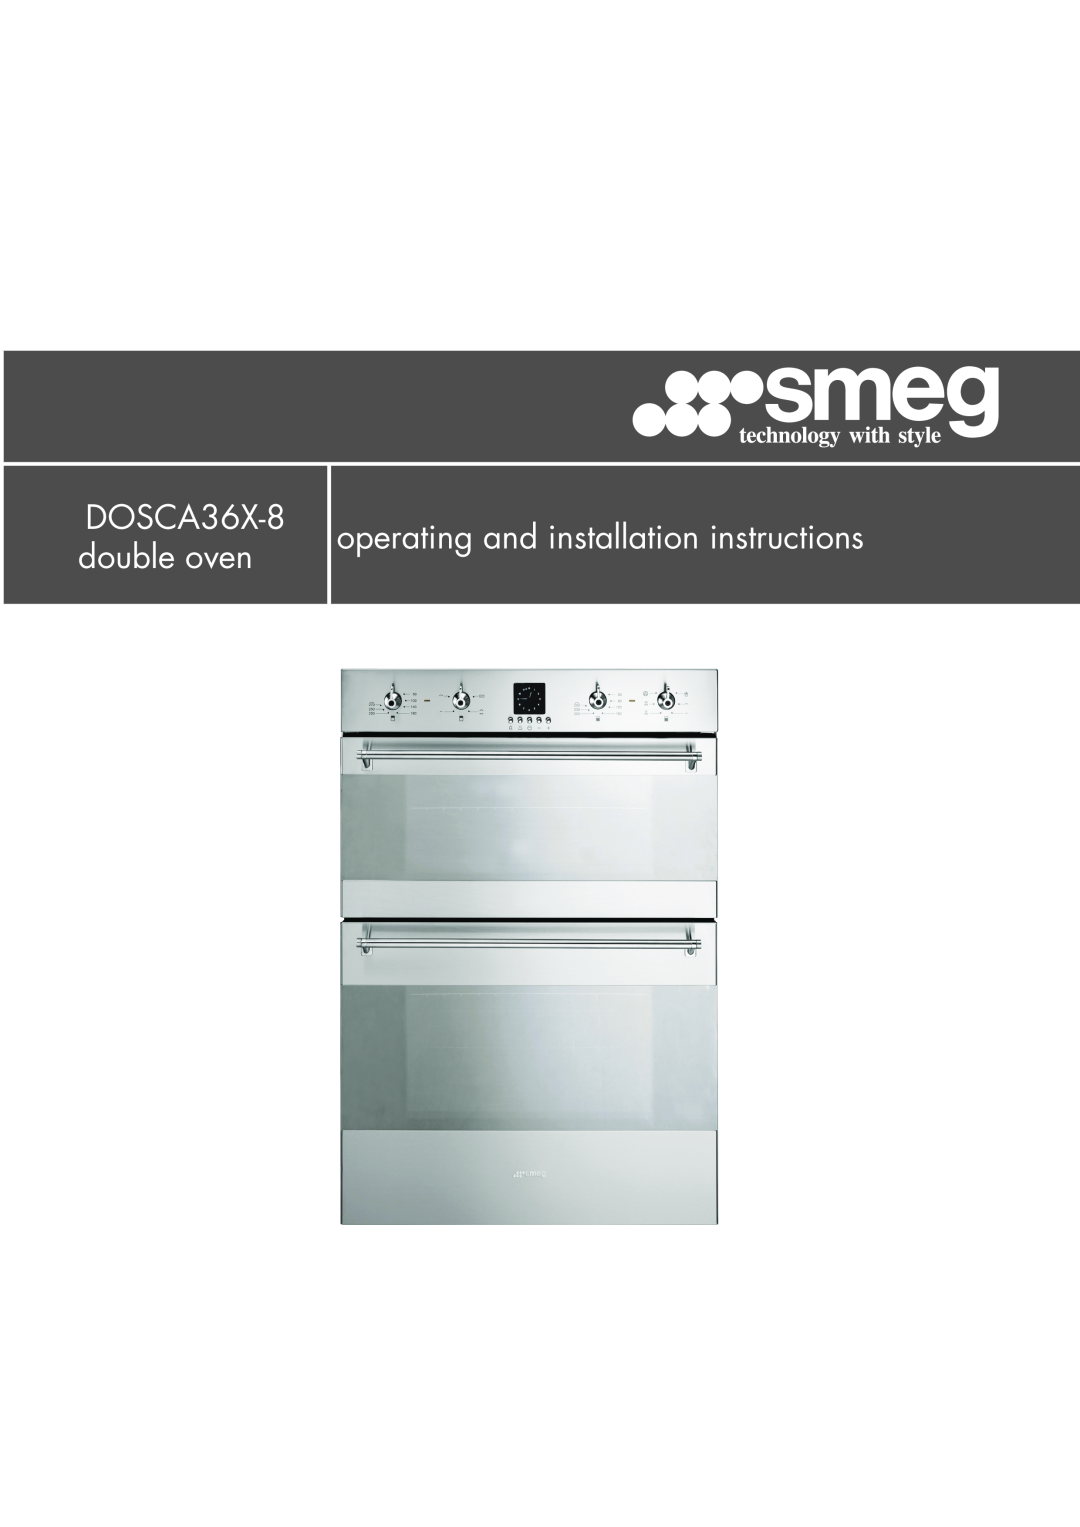 Smeg smeg Double Oven installation instructions DOSCA36X-8 double oven, operating and installation instructions 